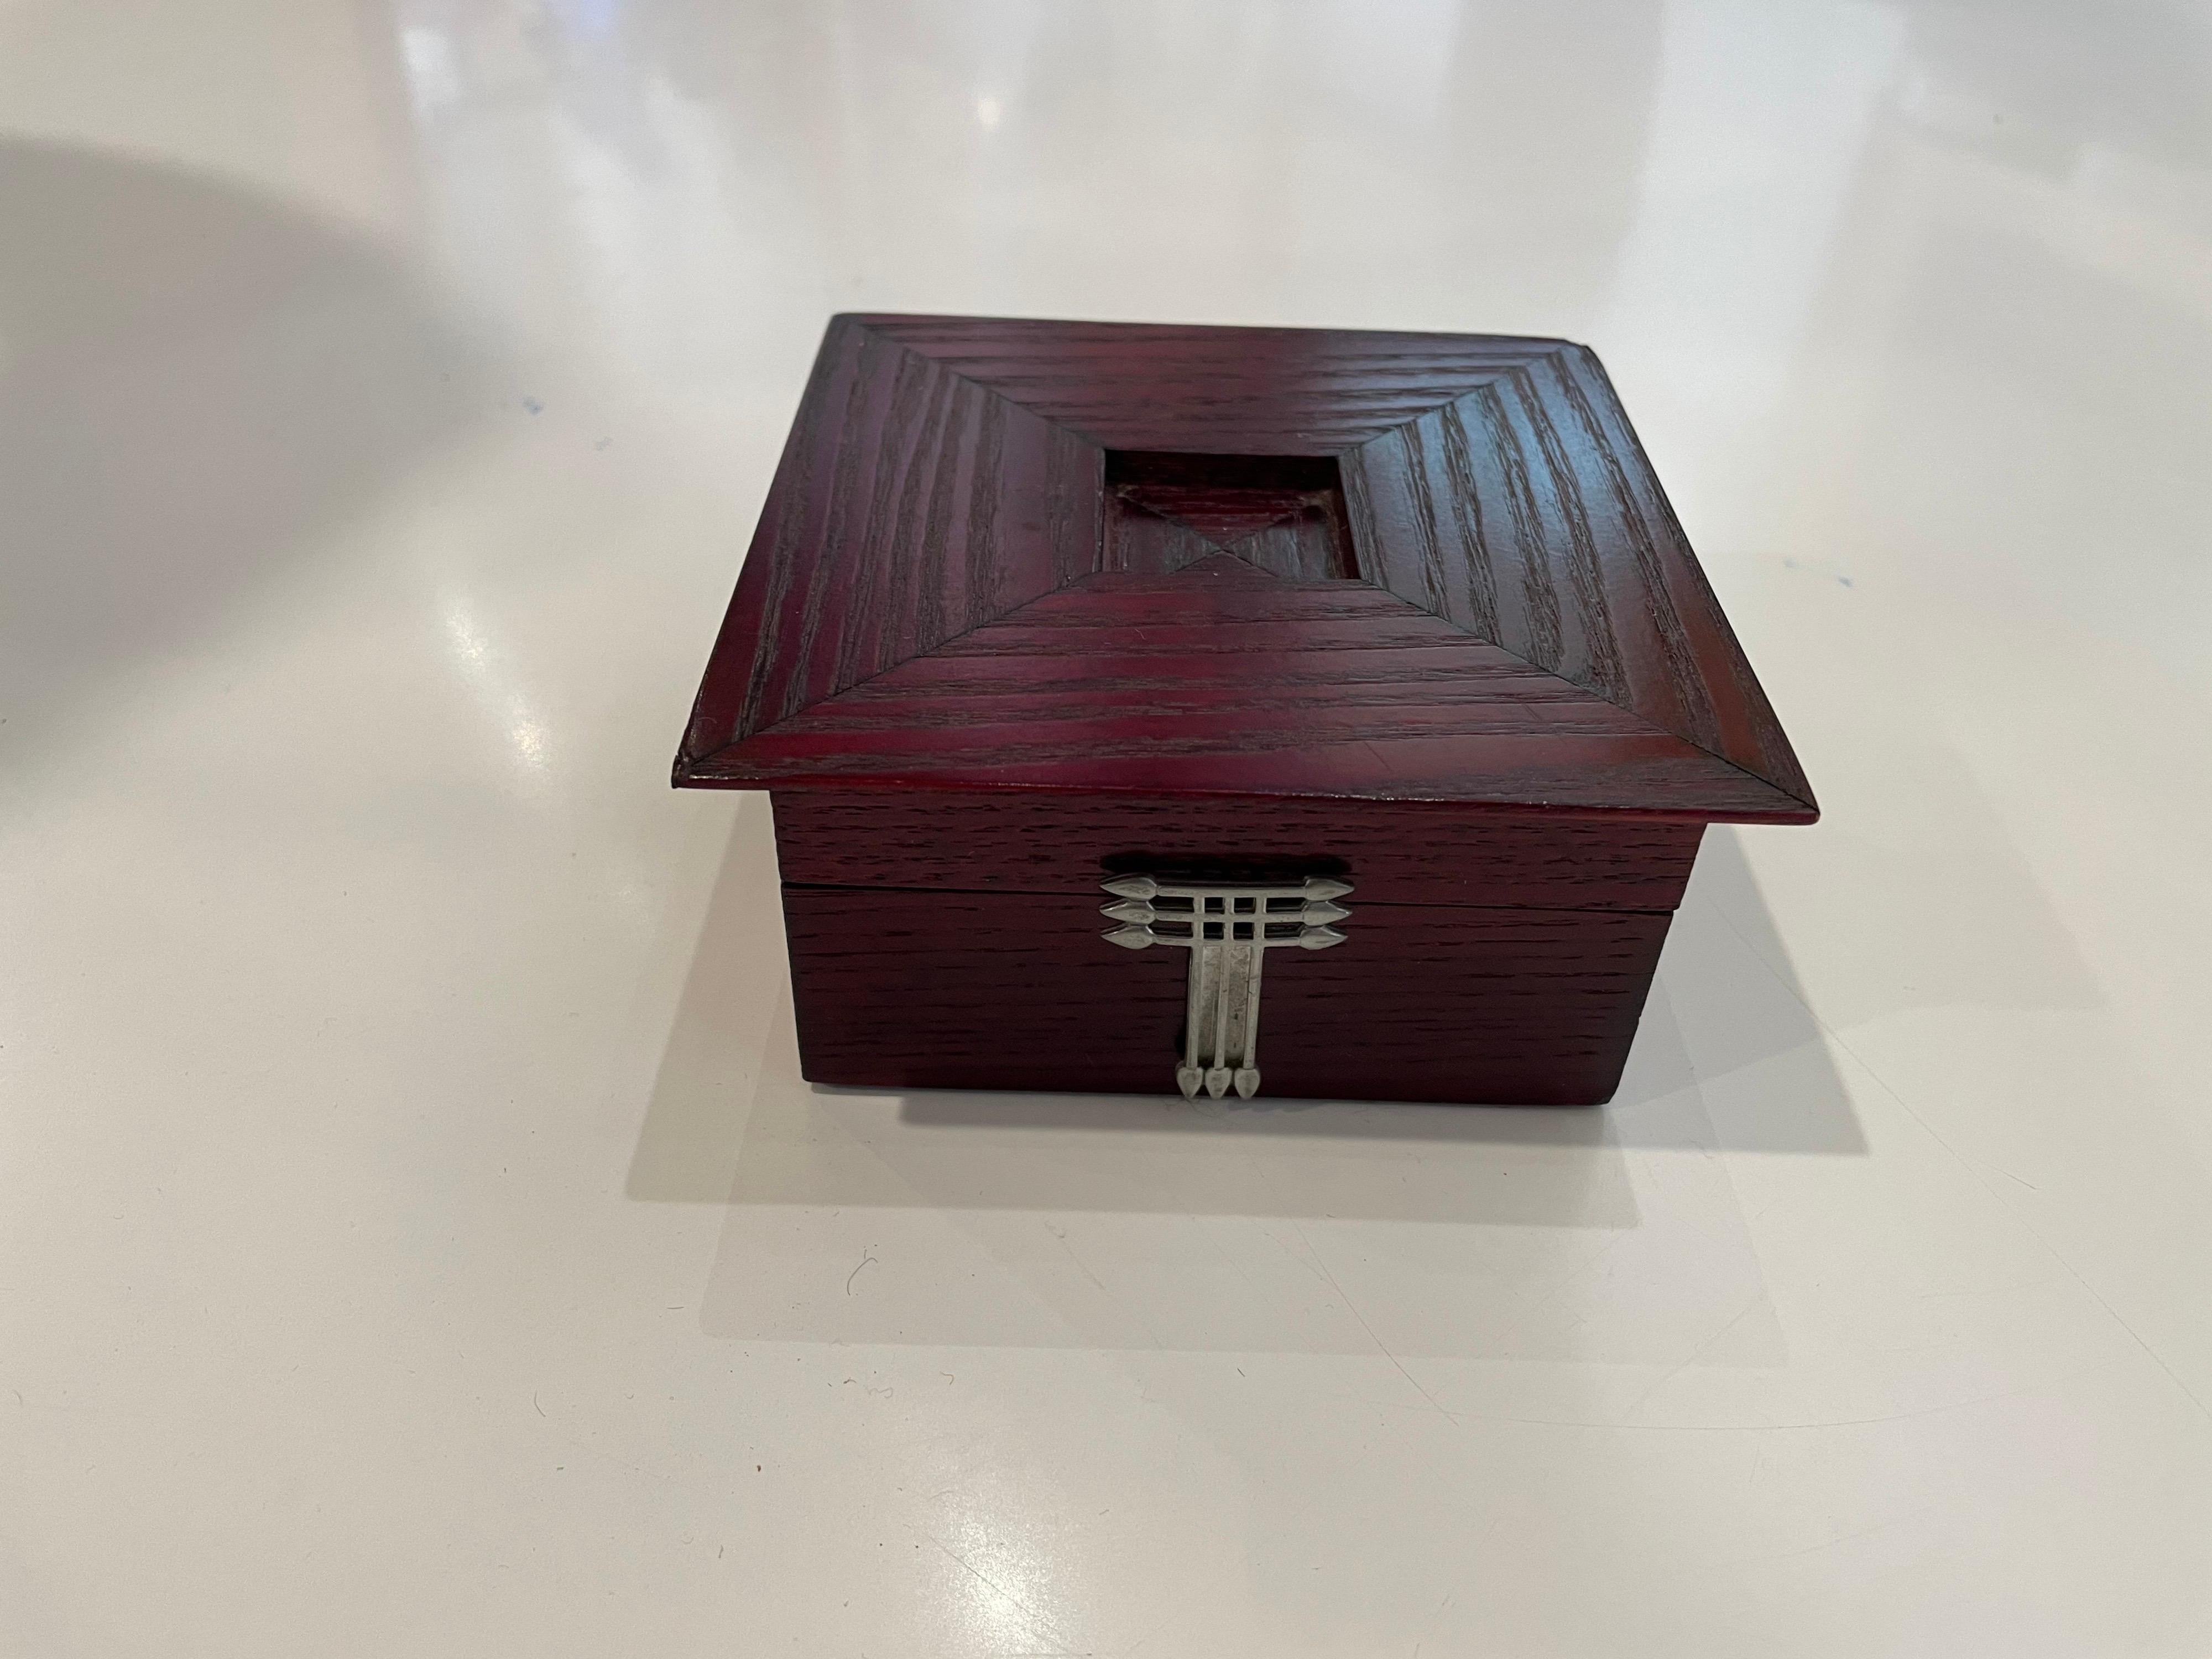 This simple elegant petite jewelry box part of the Charles Rennie Mackintosh collection, solid stain oak with pewter decorative accents., Made in Scotland by Carrick.